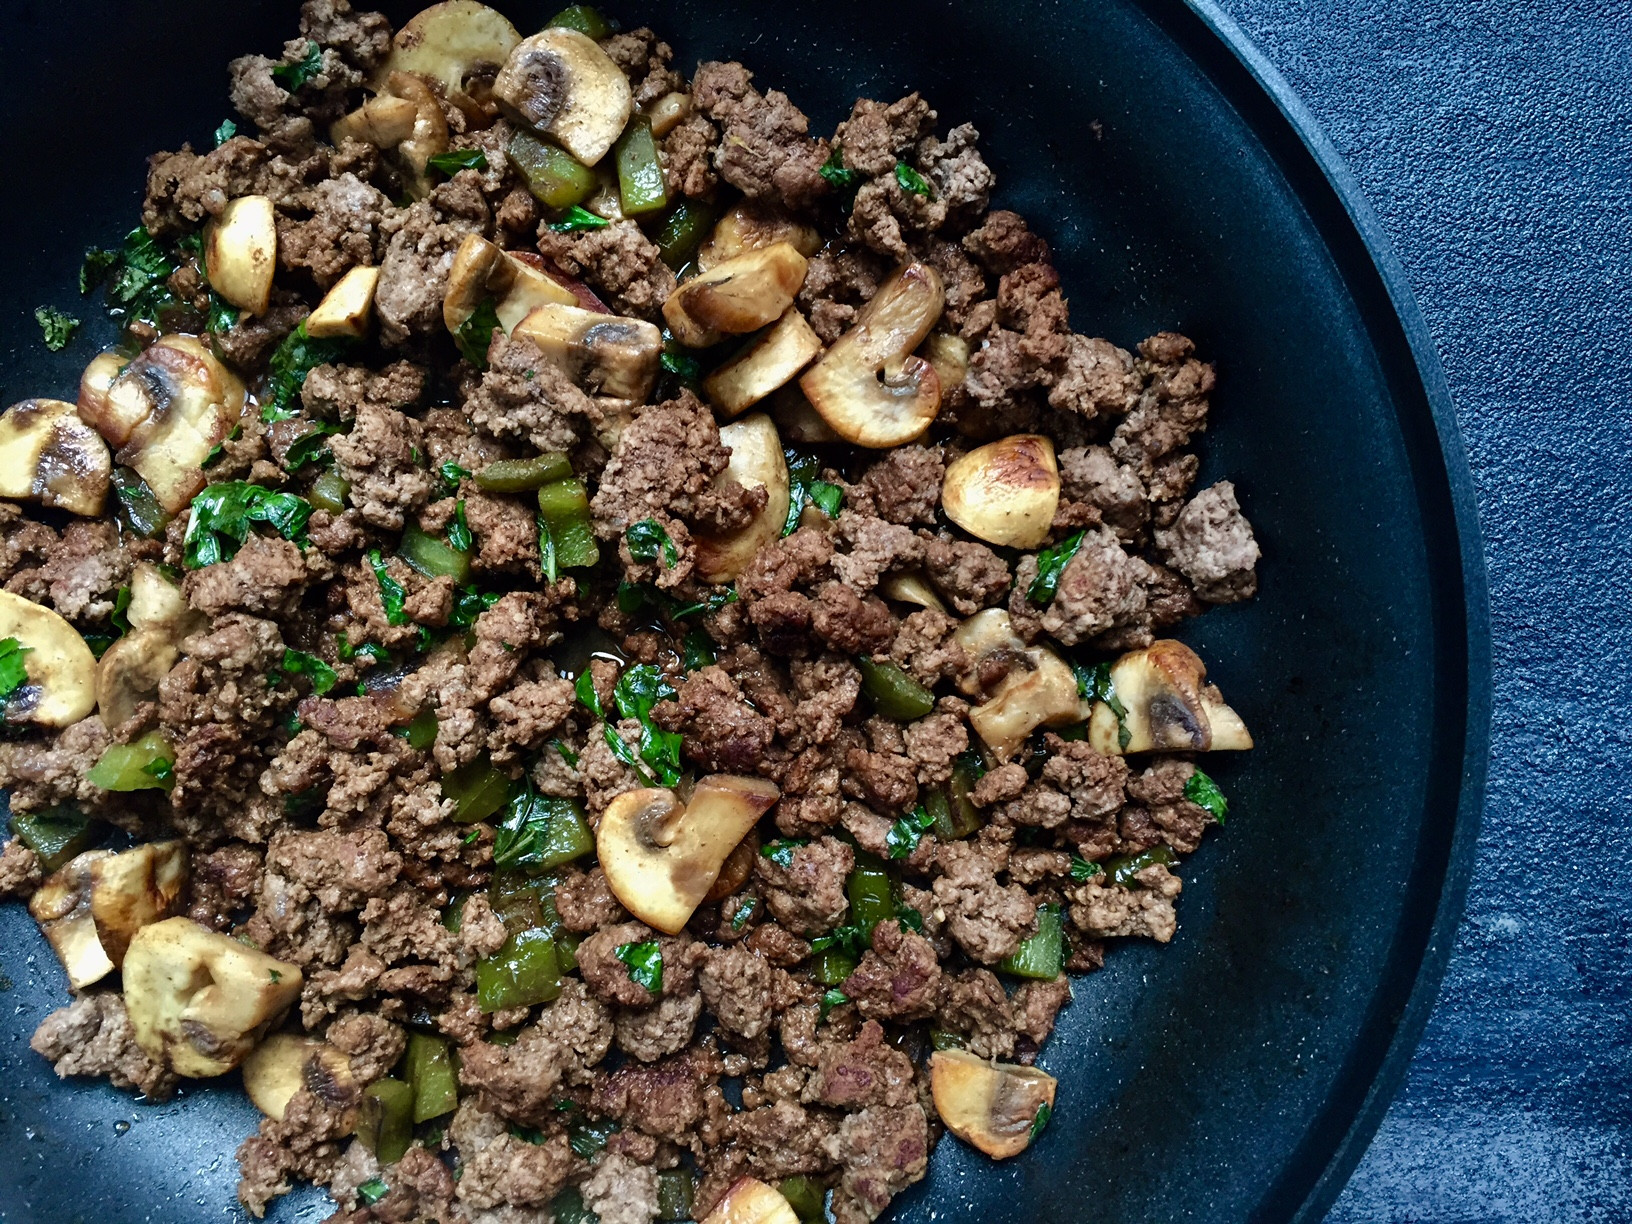 Healthy Ground Beef and Mushroom Recipes Inspirational Easy Mushroom and Ground Beef Skillet Mom to Mom Nutrition